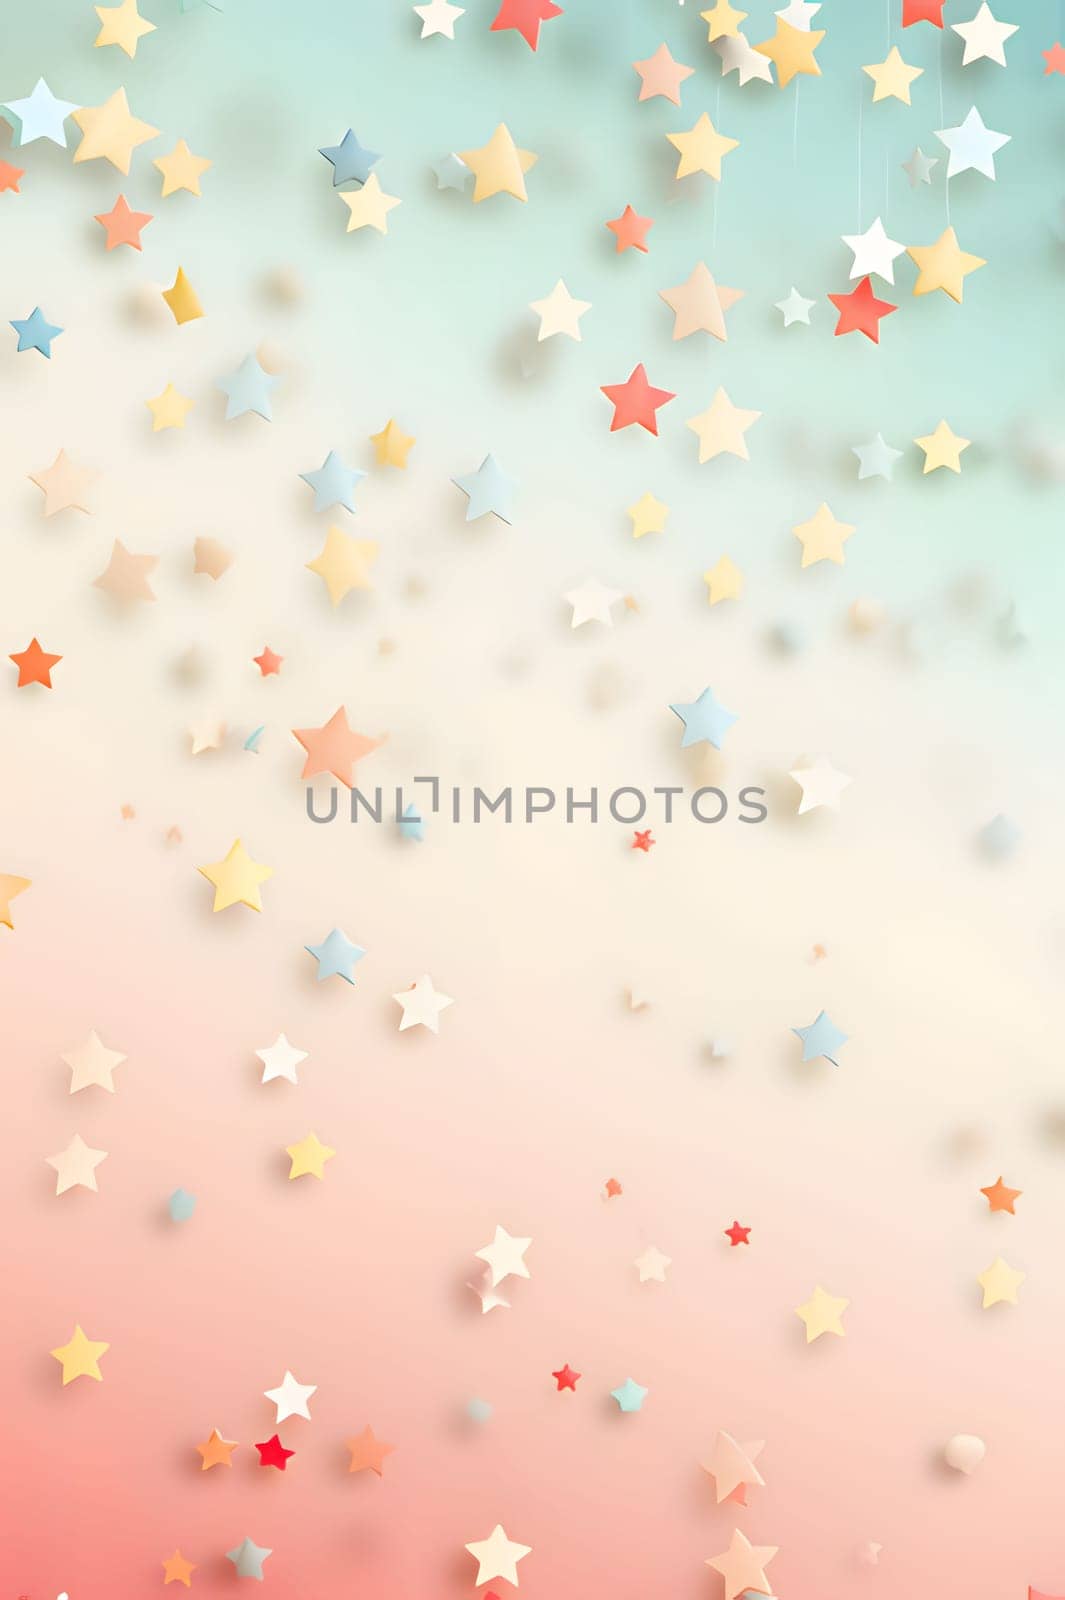 Elegant and modern. Colorful stars as abstract background, wallpaper, banner, texture design with pattern - vector. Light colors.